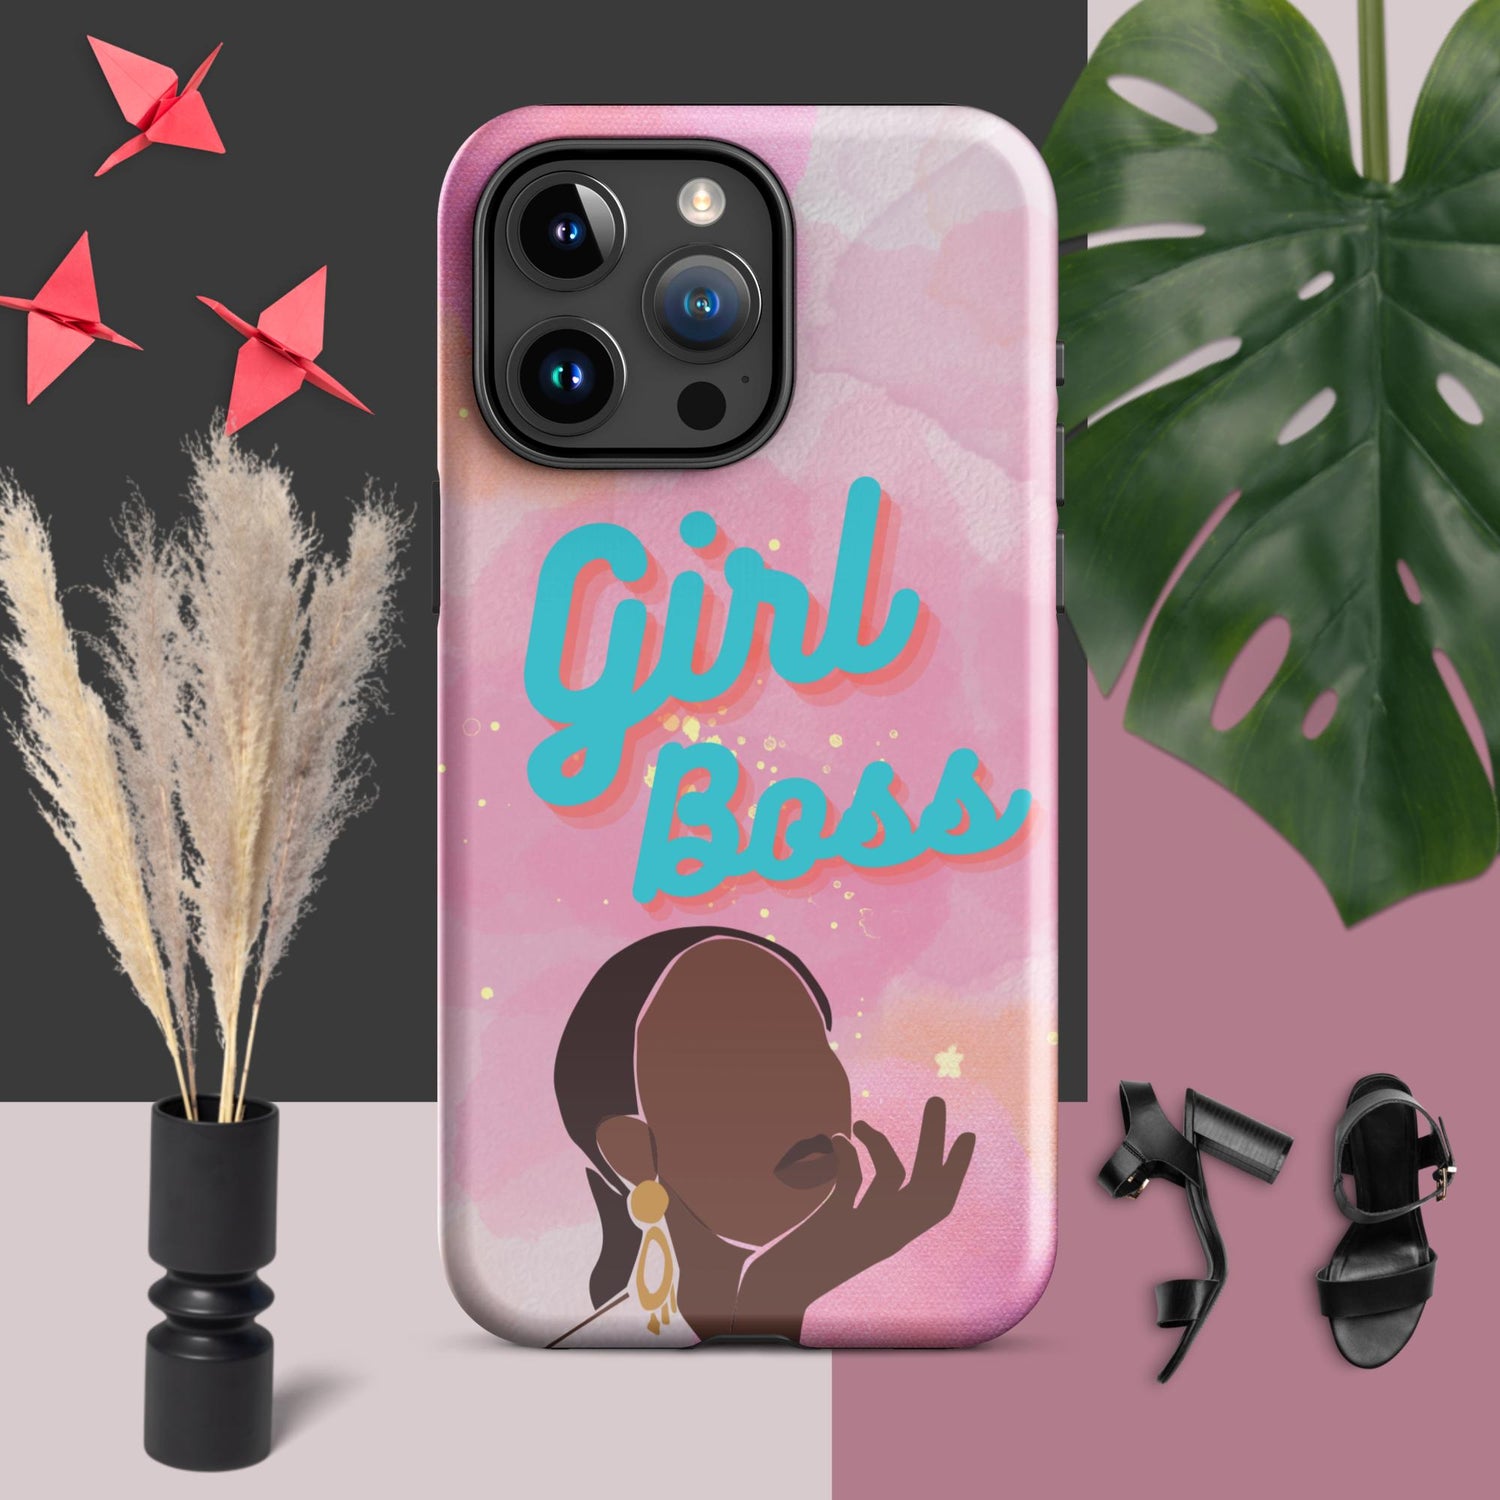 Shockproof Protective Iphone Case - Girl Boss, image, iPhone Case